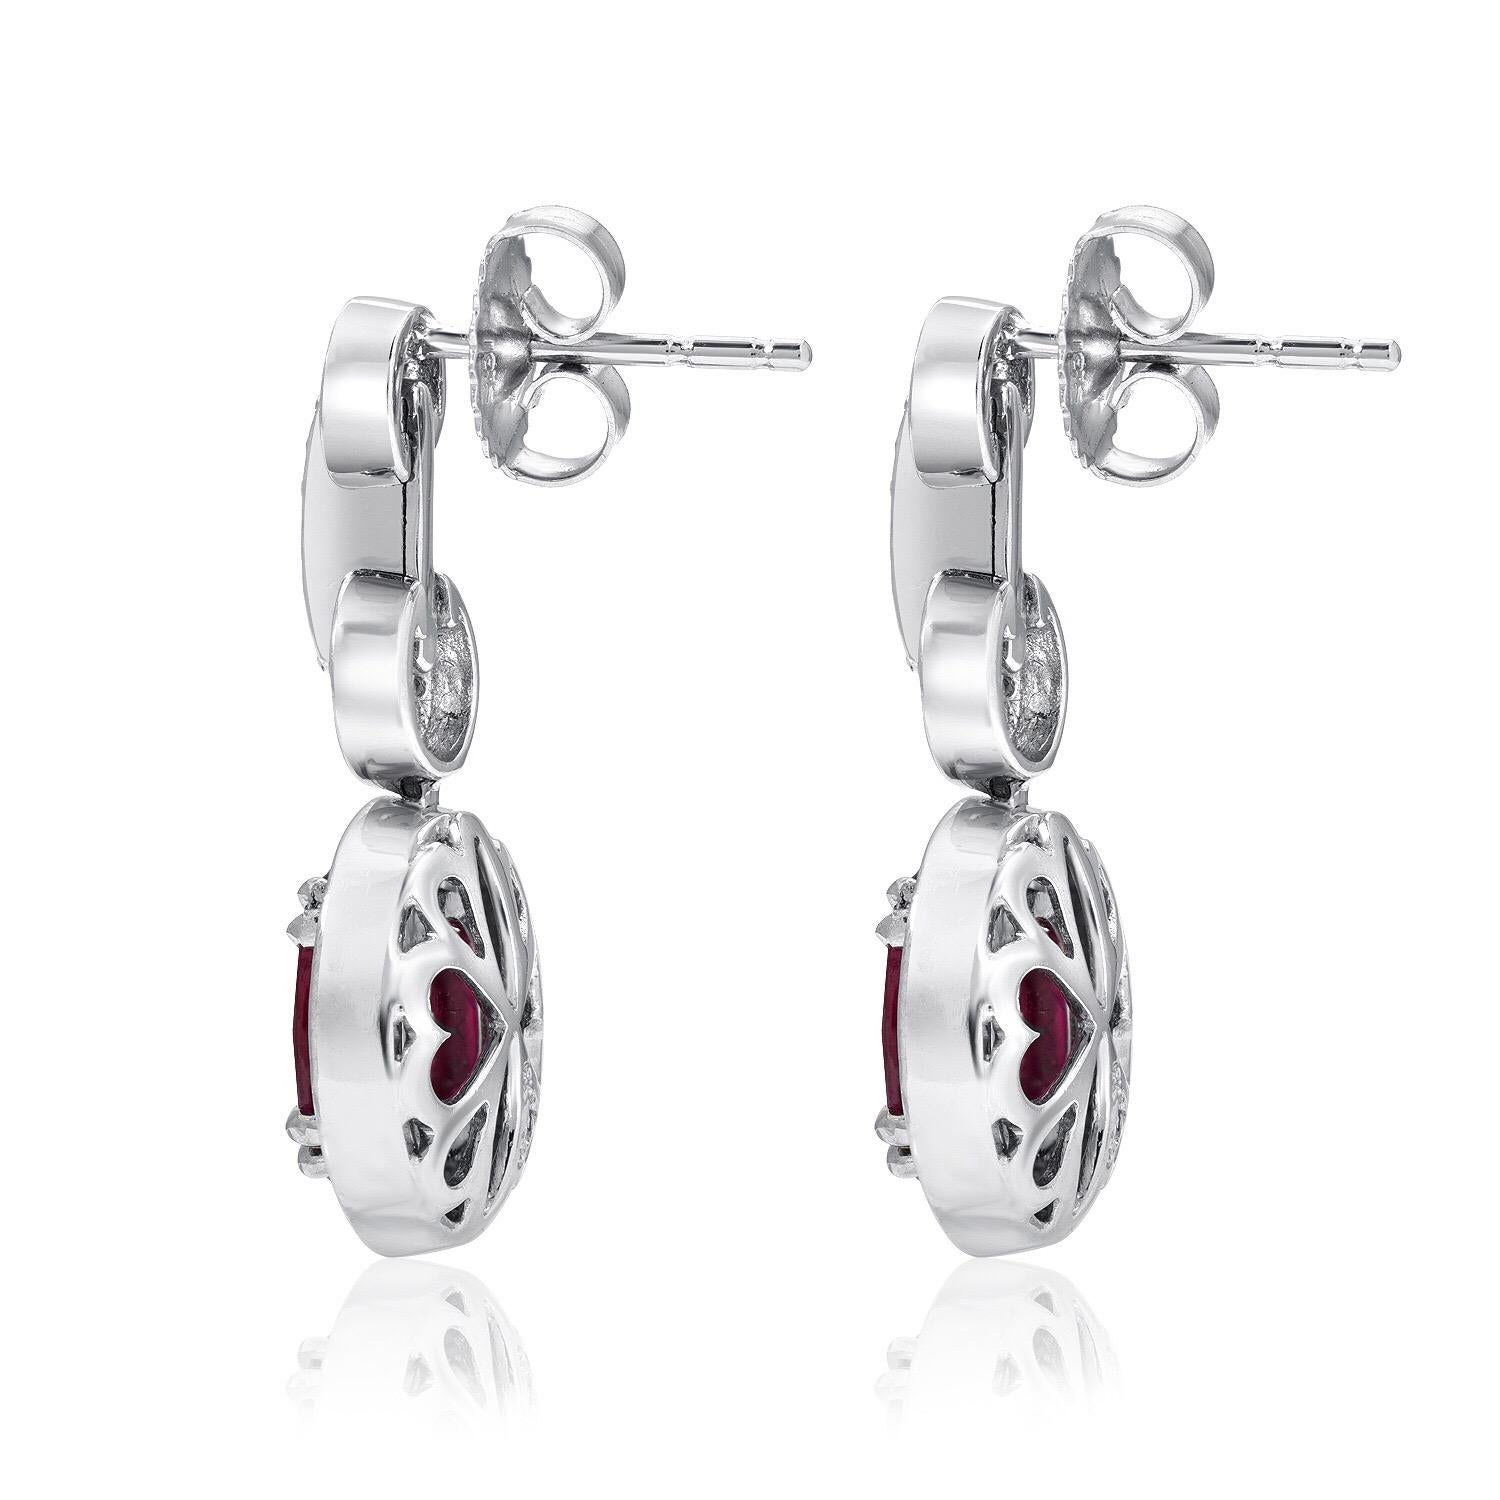 Burma Ruby earrings featuring an oval pair of Rubies weighing a total of 3.54 carats, adorned by a total of 0.53 carats of round brilliant diamonds, in 18K white gold.
These drop earrings are approximately 1 inch in length.
The AGL certificate is